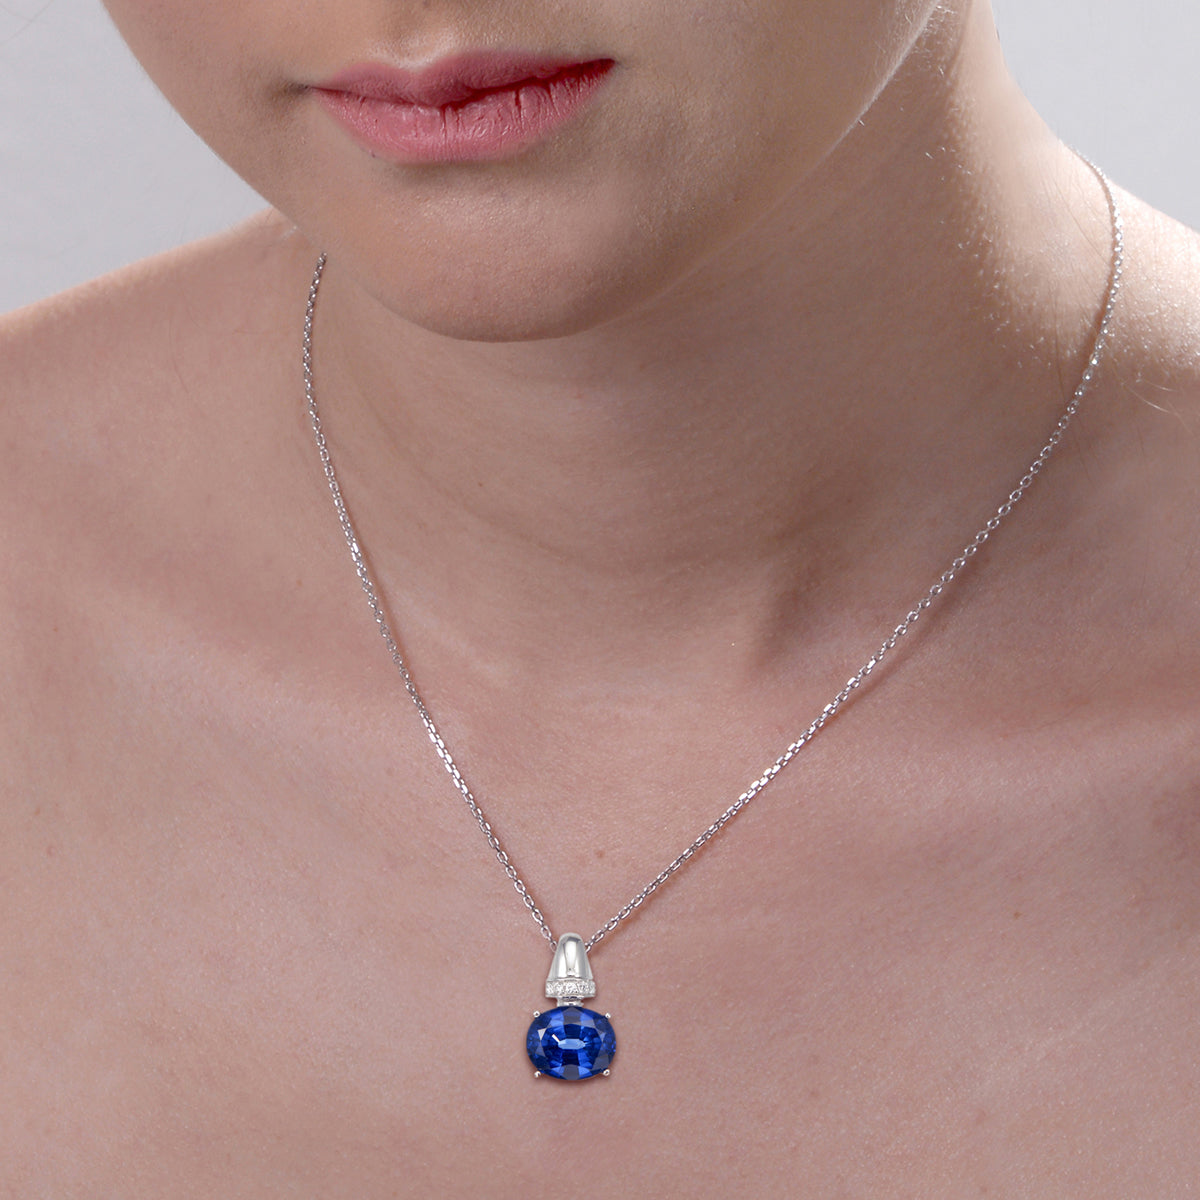 3.70 cttw Pendant Necklace, Created Blue Sapphire Oval Pendant Necklace for Women in .925 Sterling Silver with Rhodium, 18 Inch Chain, Prong Setting